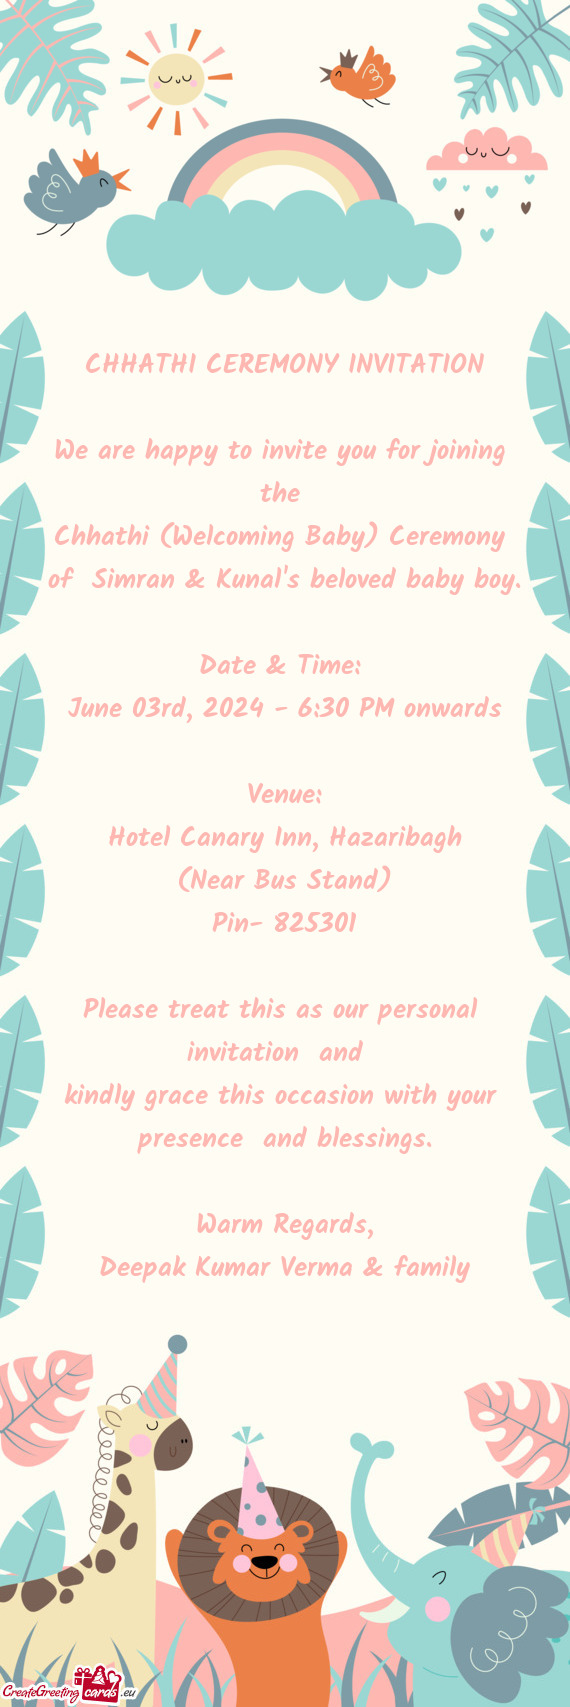 We are happy to invite you for joining the  Chhathi (Welcoming Baby) Ceremony  of  Sim